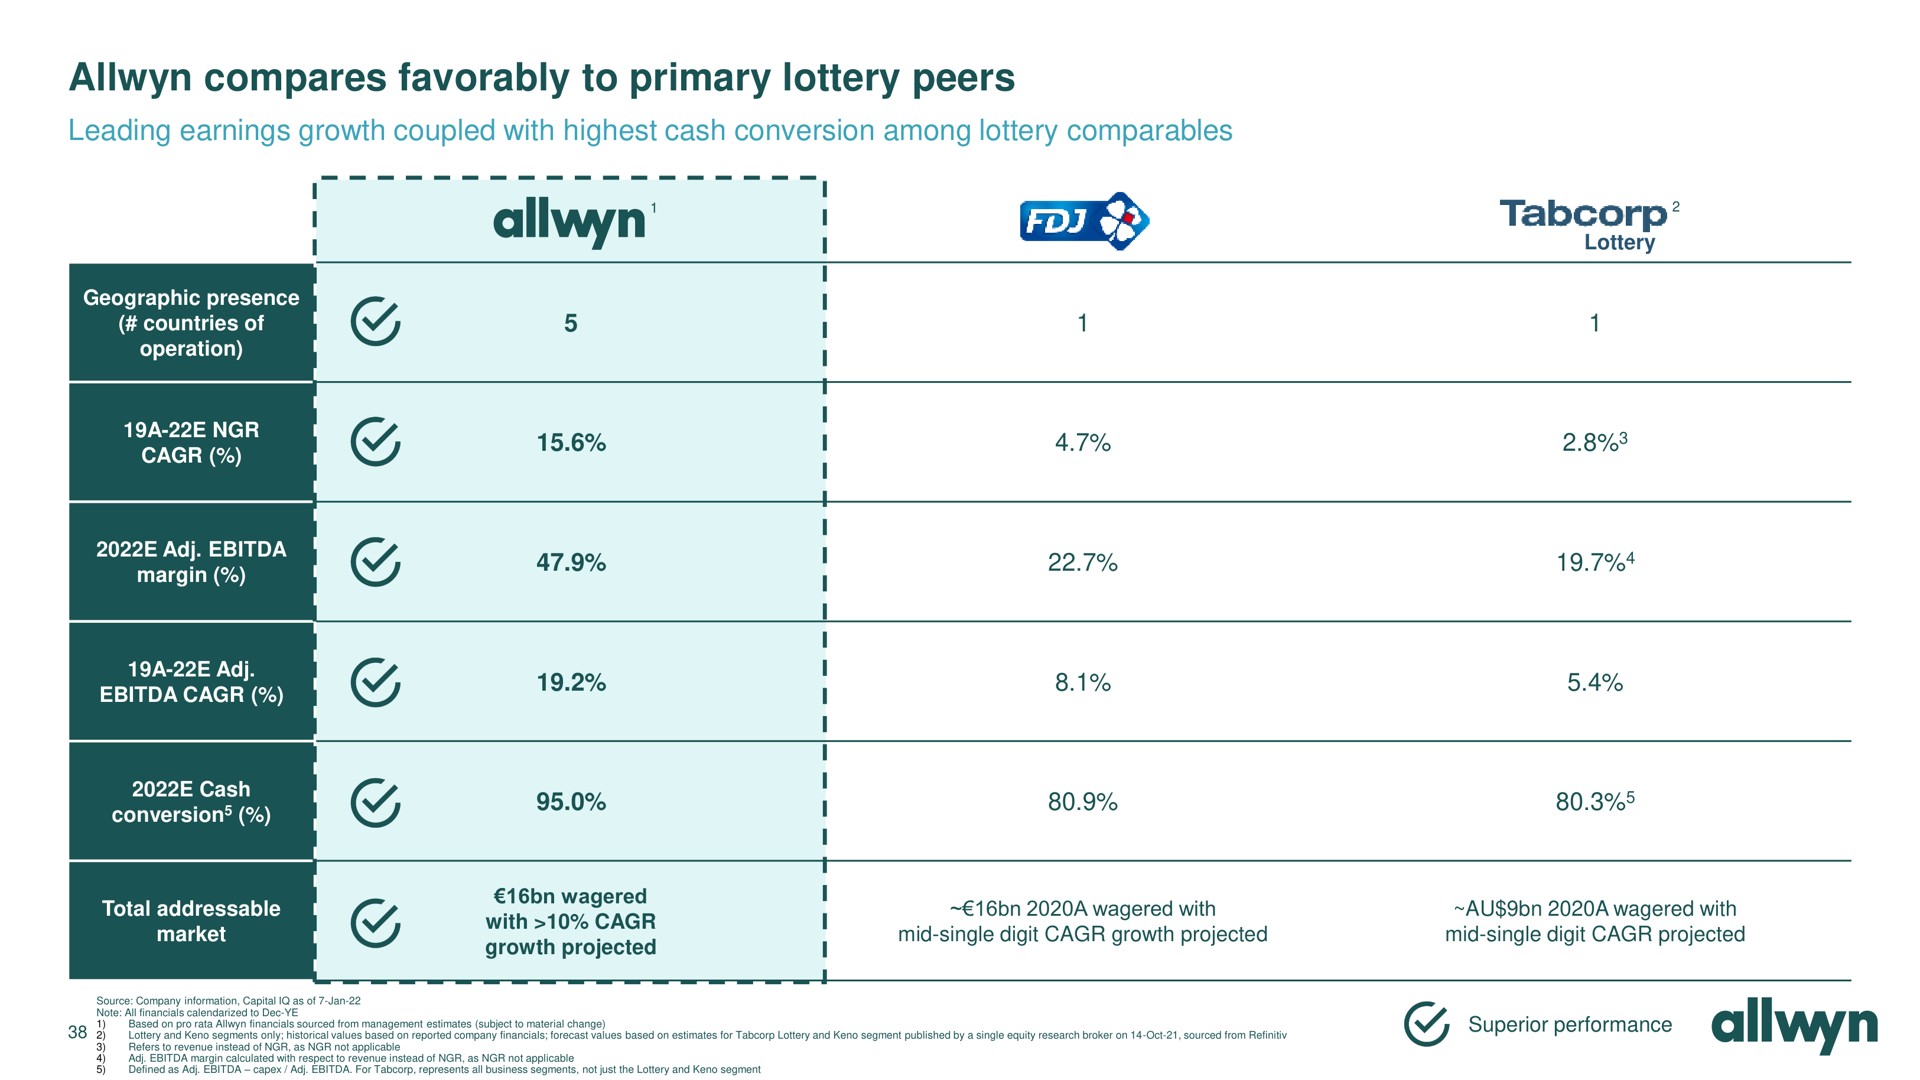 compares favorably to primary lottery peers leading earnings growth coupled with highest cash conversion among lottery i eer ten cee reese i i a wagered a wagered historical valves on reported company anal selves based on estimates lote and keno segment published by a single equity research broker on sourced superior performance | Allwyn